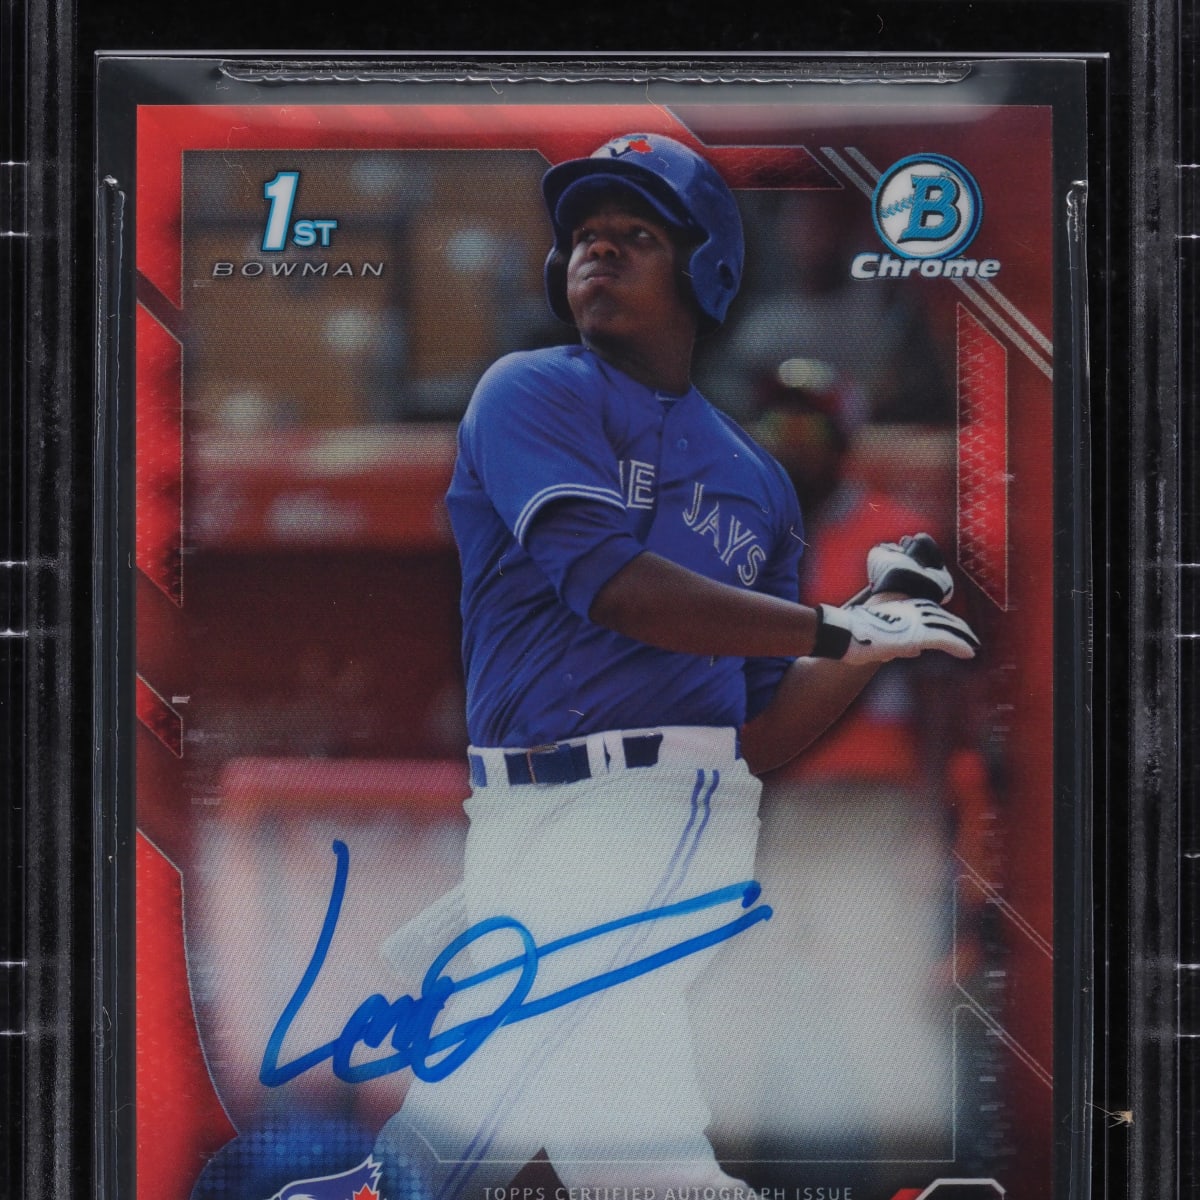 Vlad Guerrero Jr. rookie card sets record with $552K sale - Sports